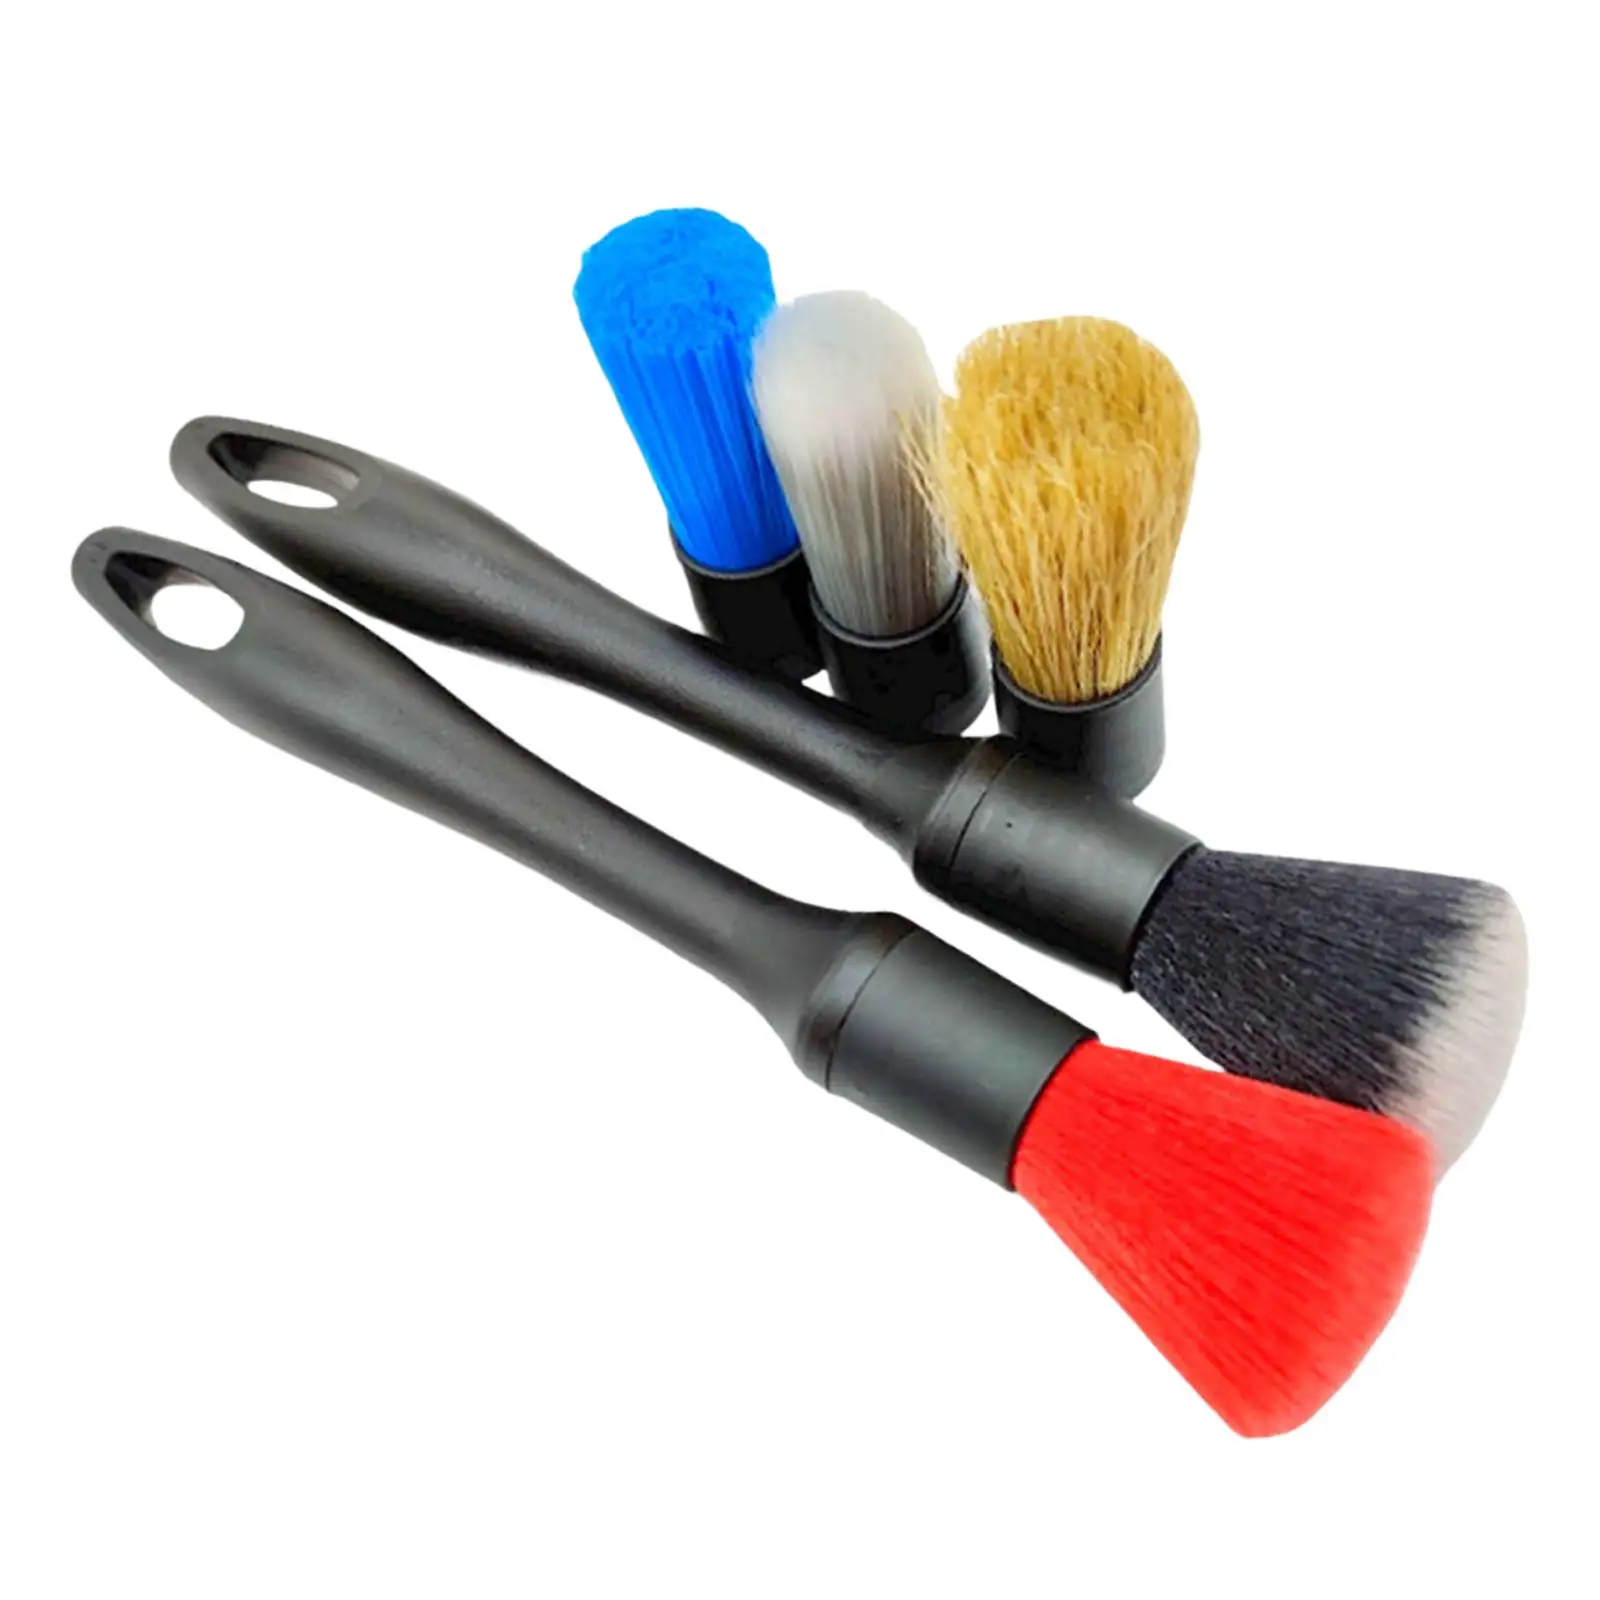 Soft Car Detail Brushes Accessories Durable Car Interior Cleaning set for